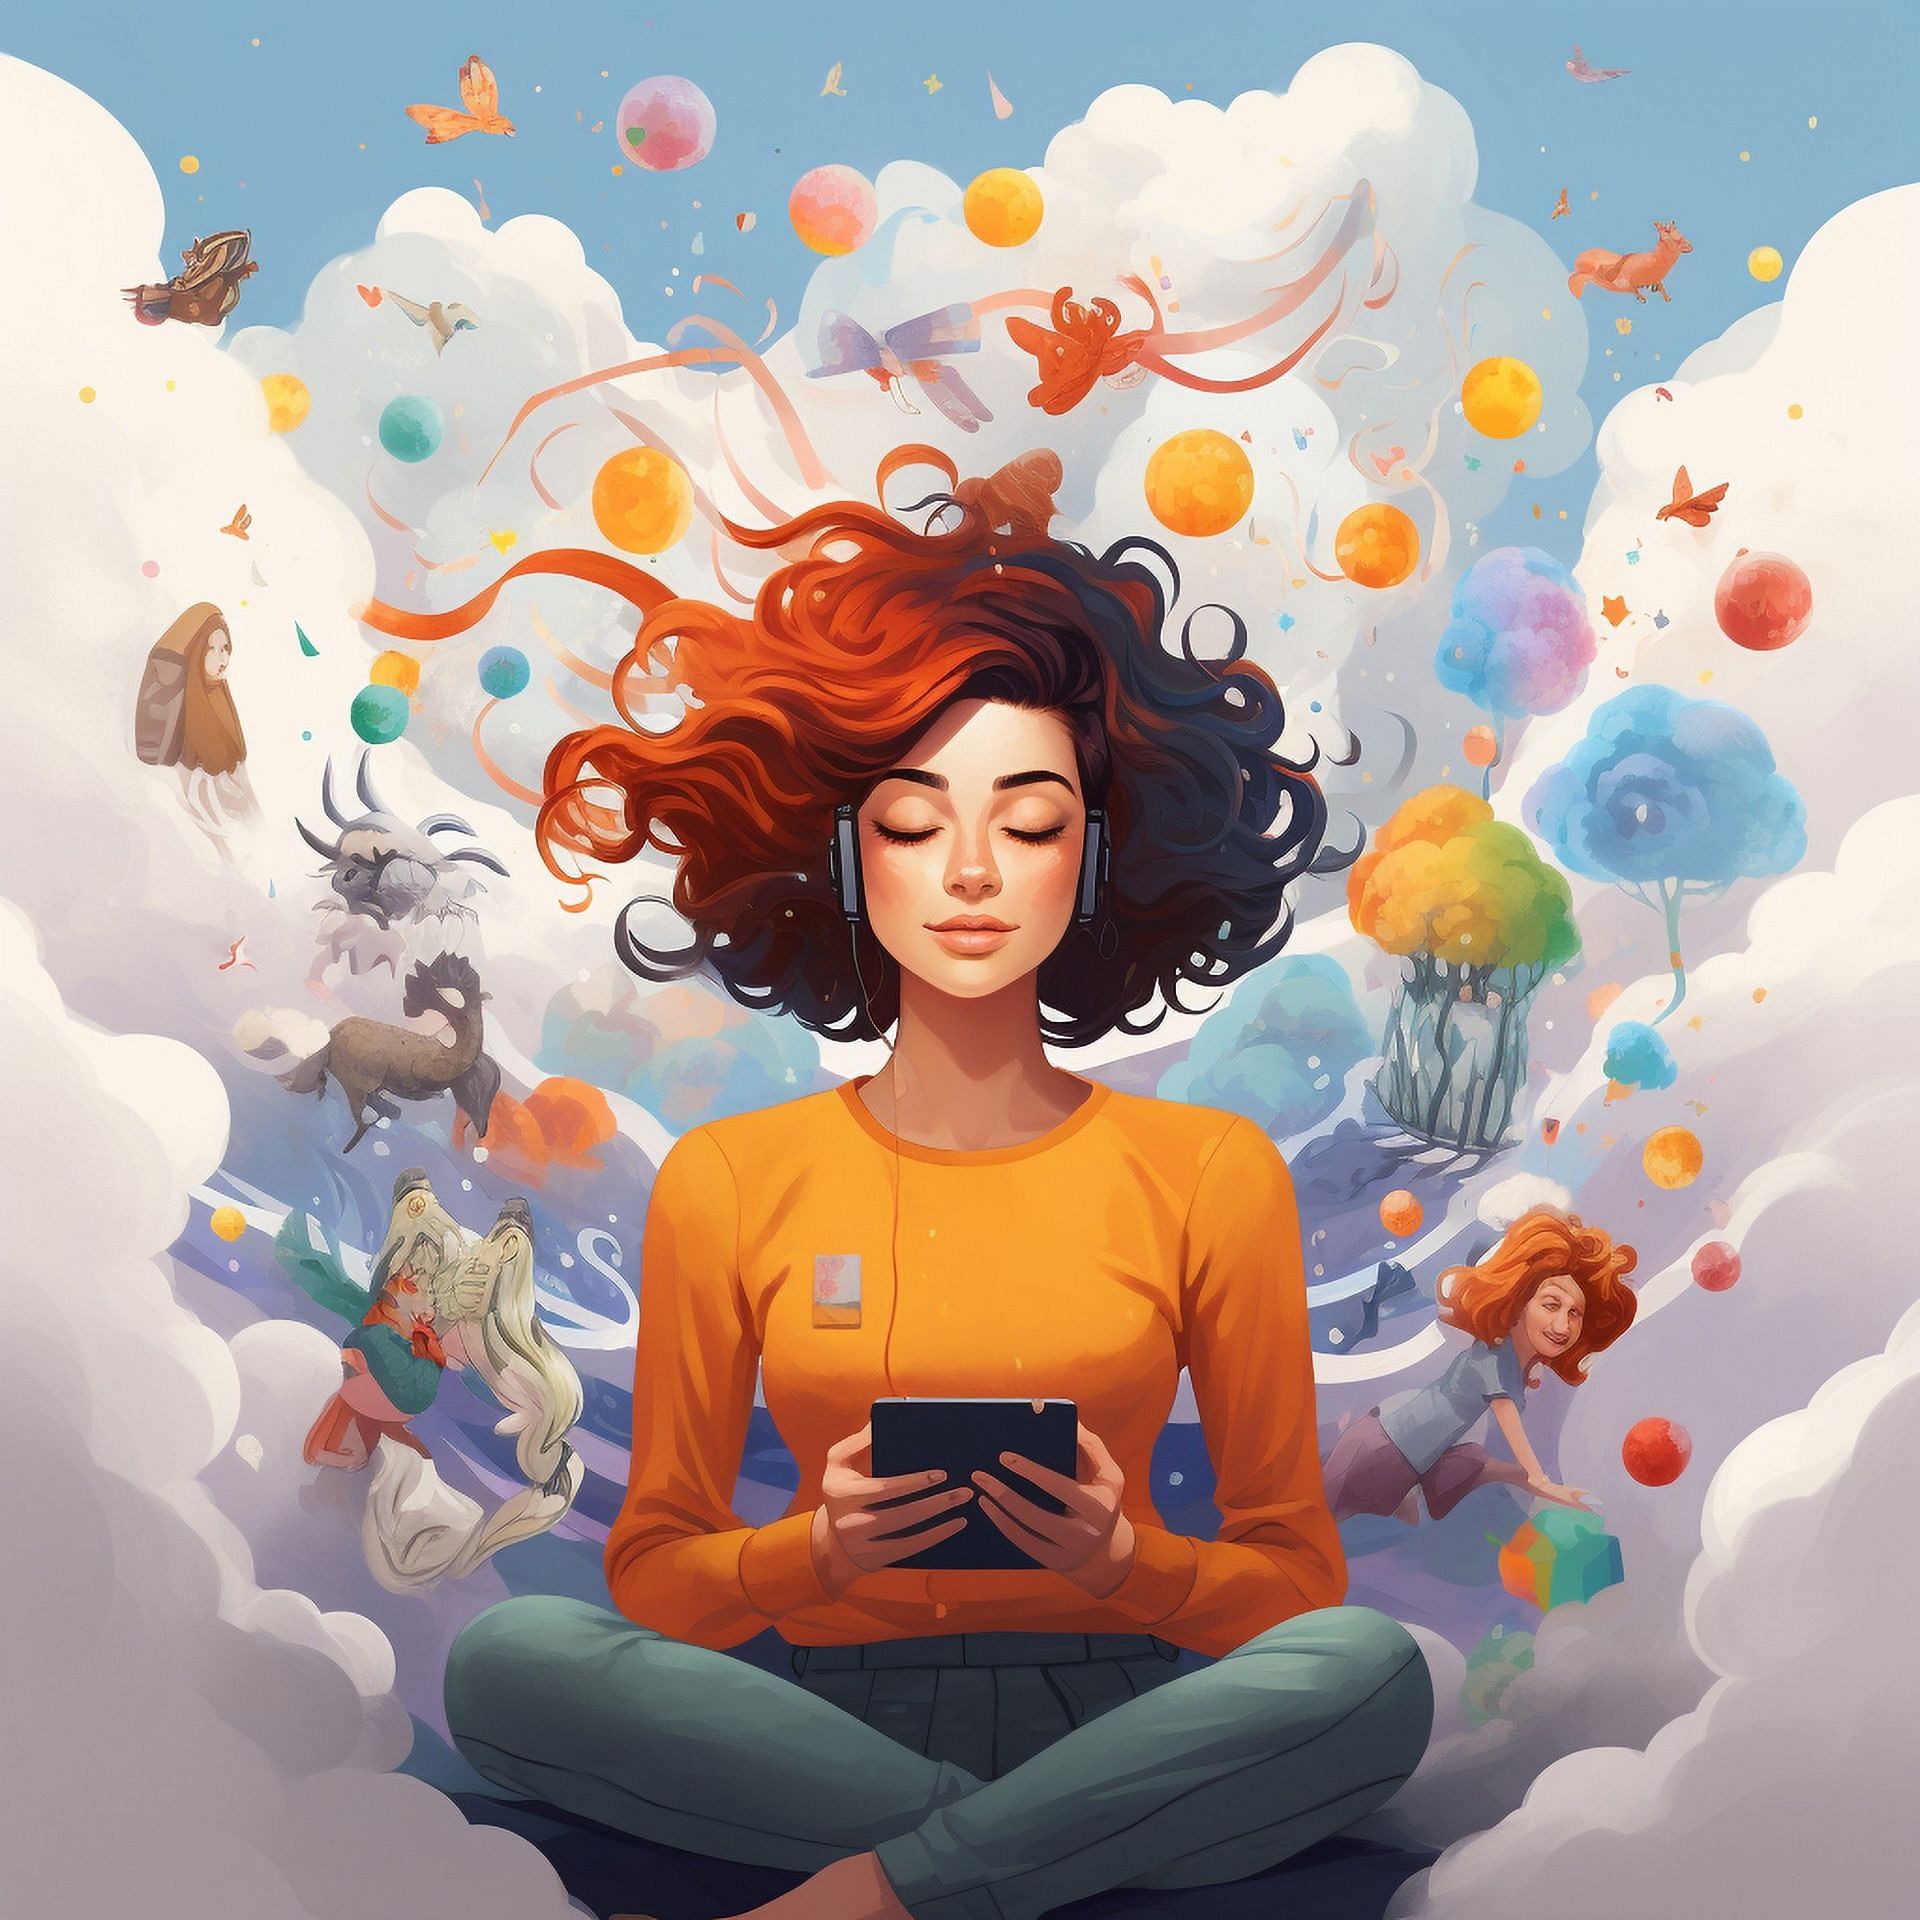 You can slowly gain more control over your thoughts. (Image via Vecteezy/ Amir Hamza)